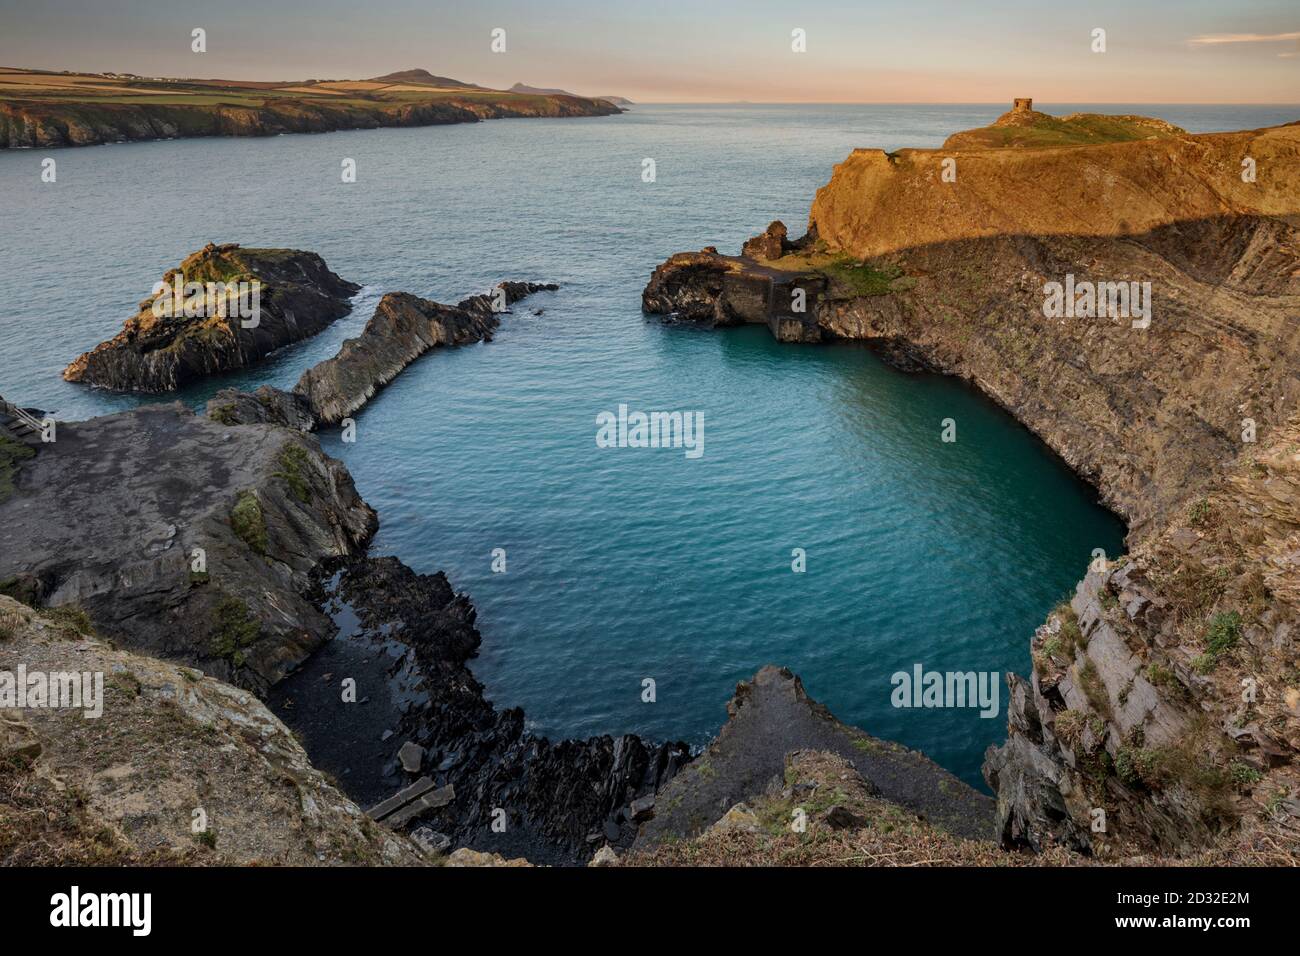 The Blue Lagoon at Abereiddi is one of the best examples in Pembrokeshire of a sea quarry, and popular for coasteering, swimming and diving. Stock Photo